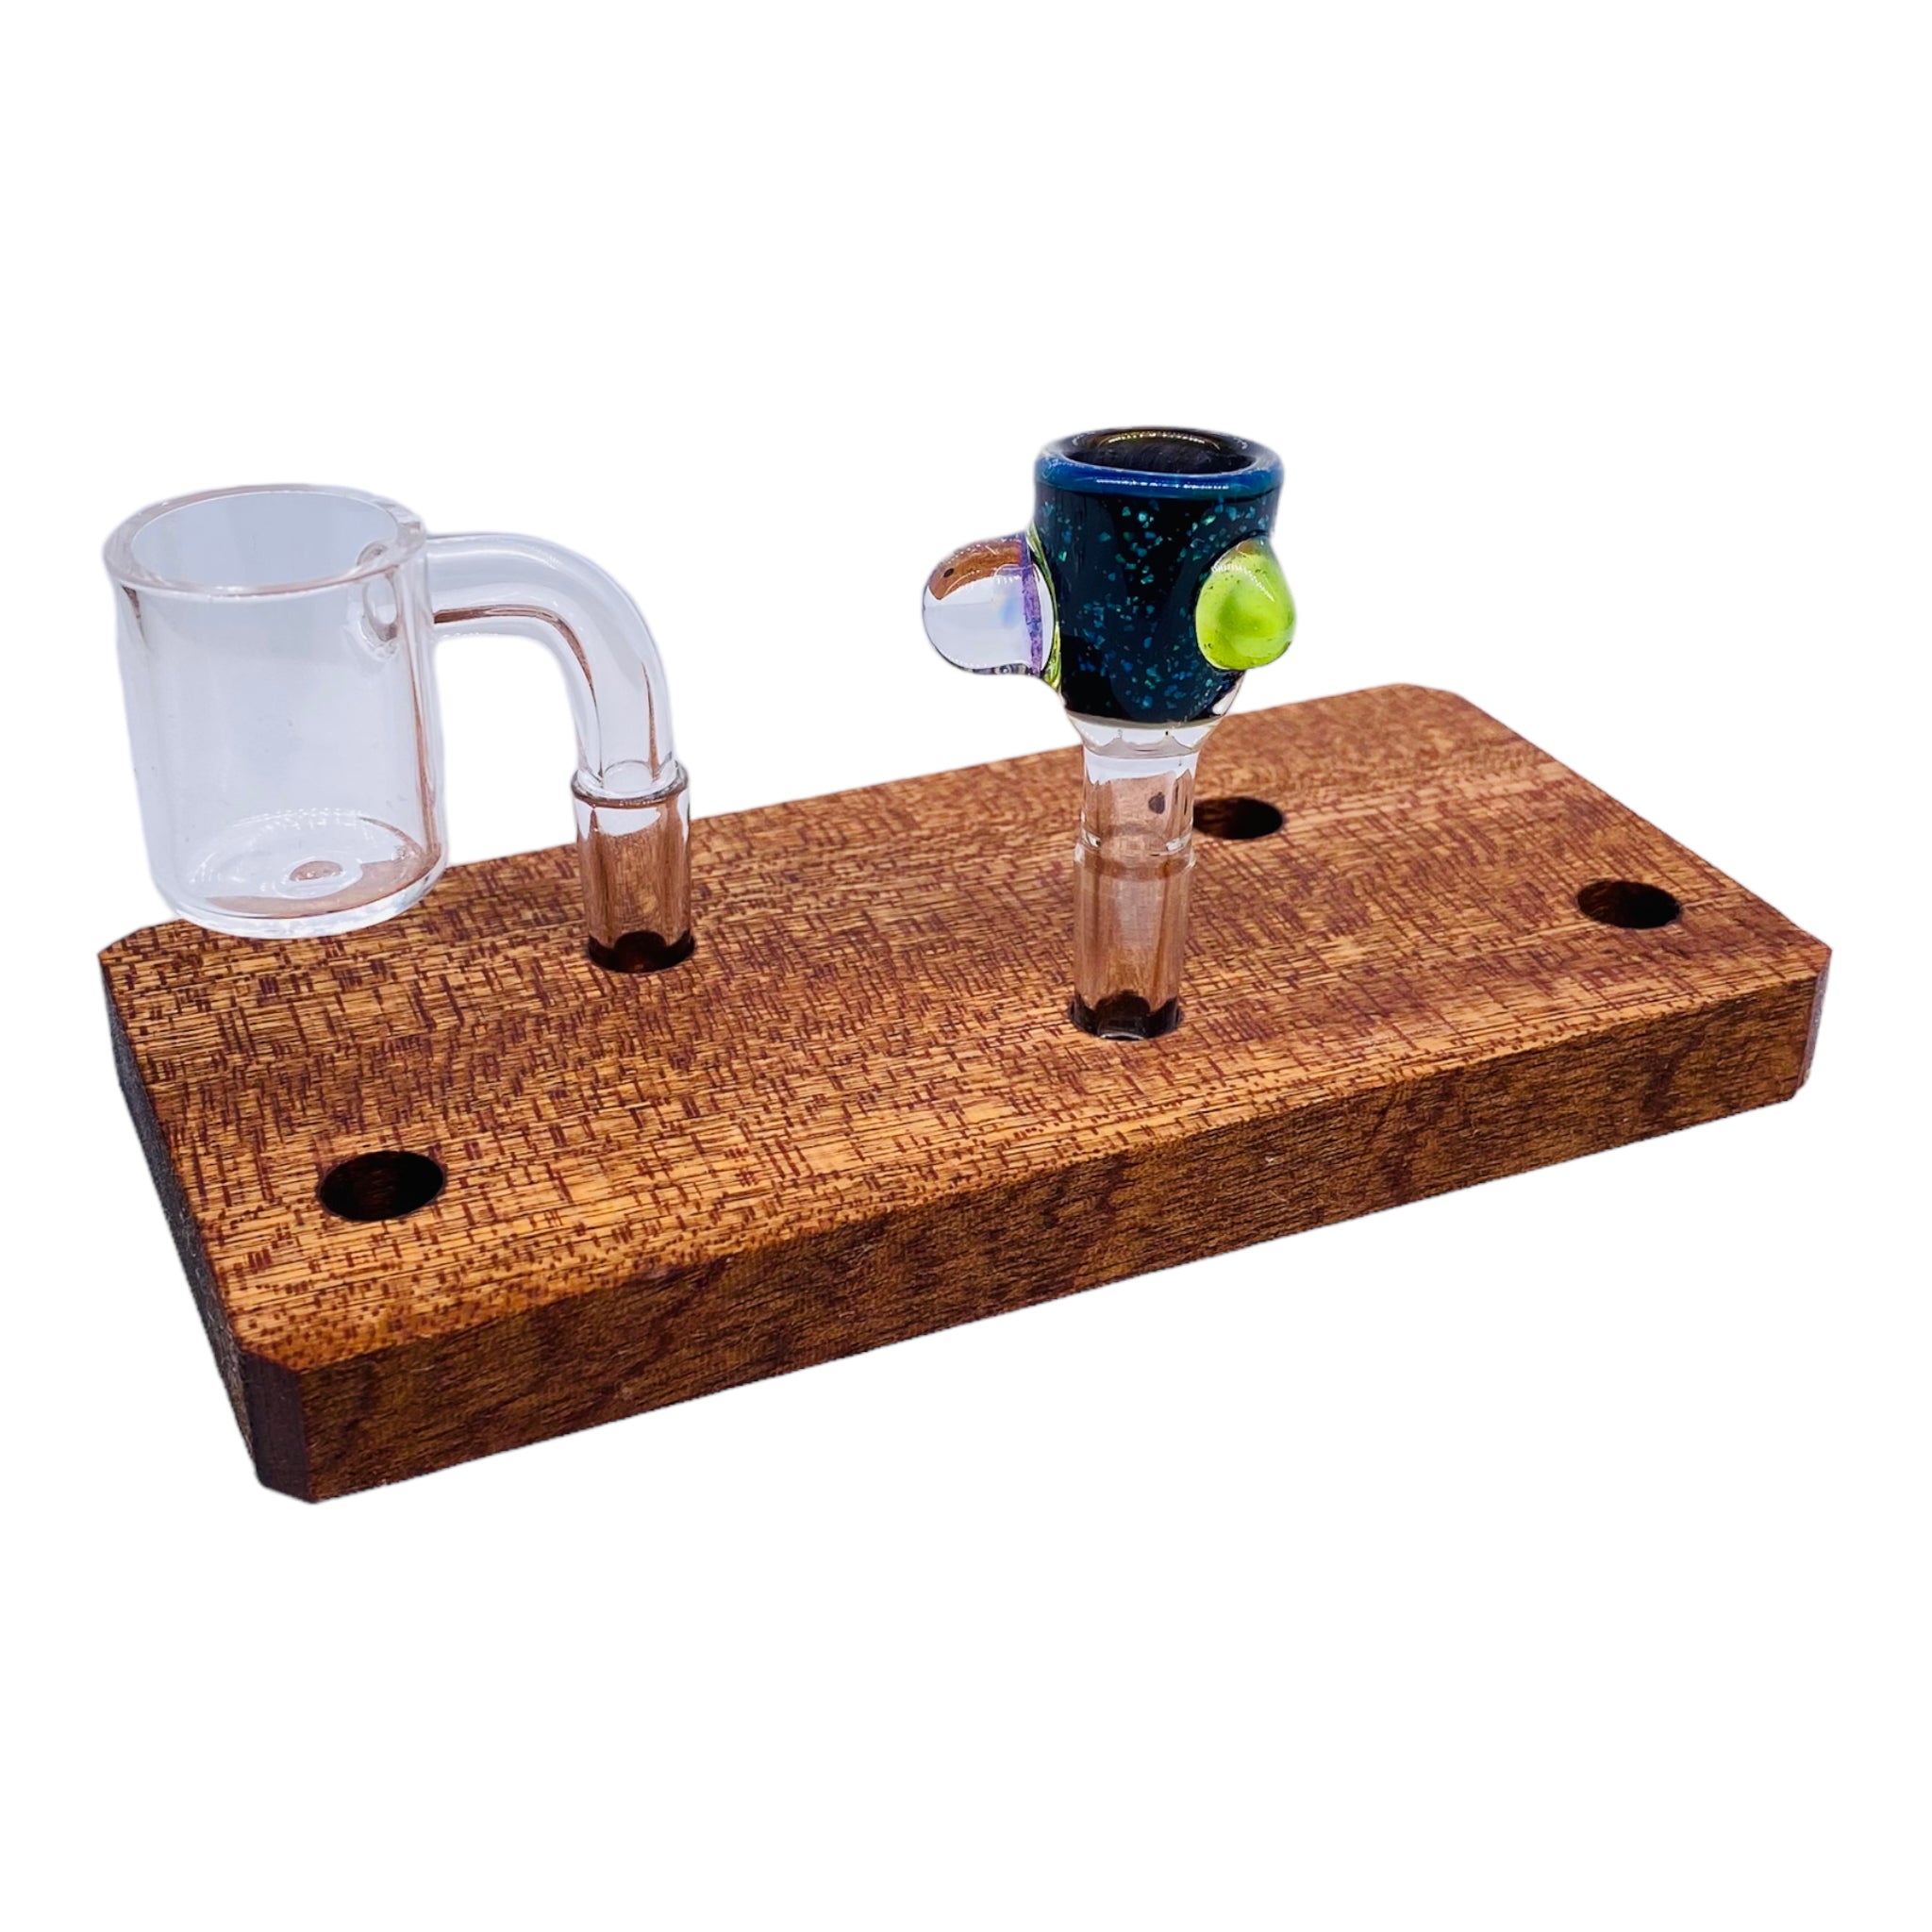 5 Hole Wood Display Stand Holder For 10mm Bong Bowl Pieces Or Quartz Bangers - Mahogany